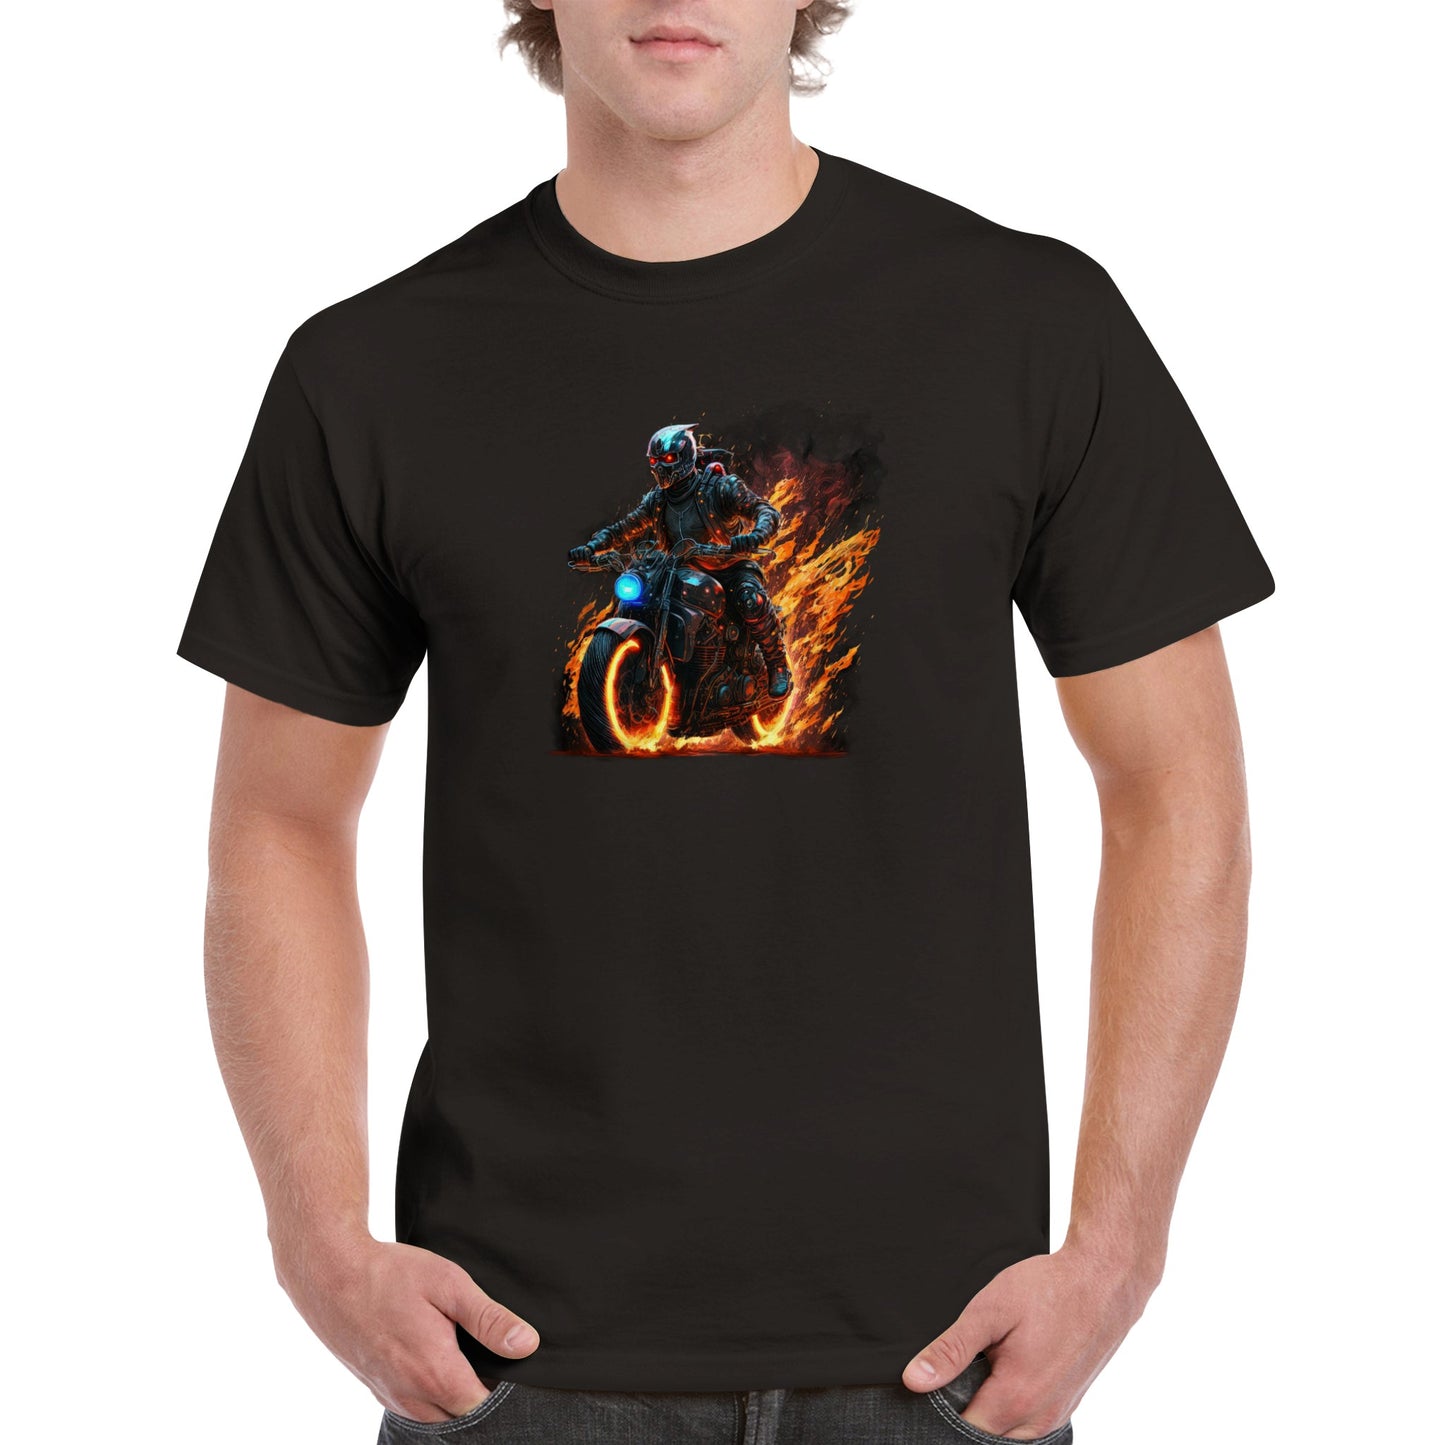 Space Robot on fire riding motorcycle Heavyweight Unisex Crewneck T-shirt